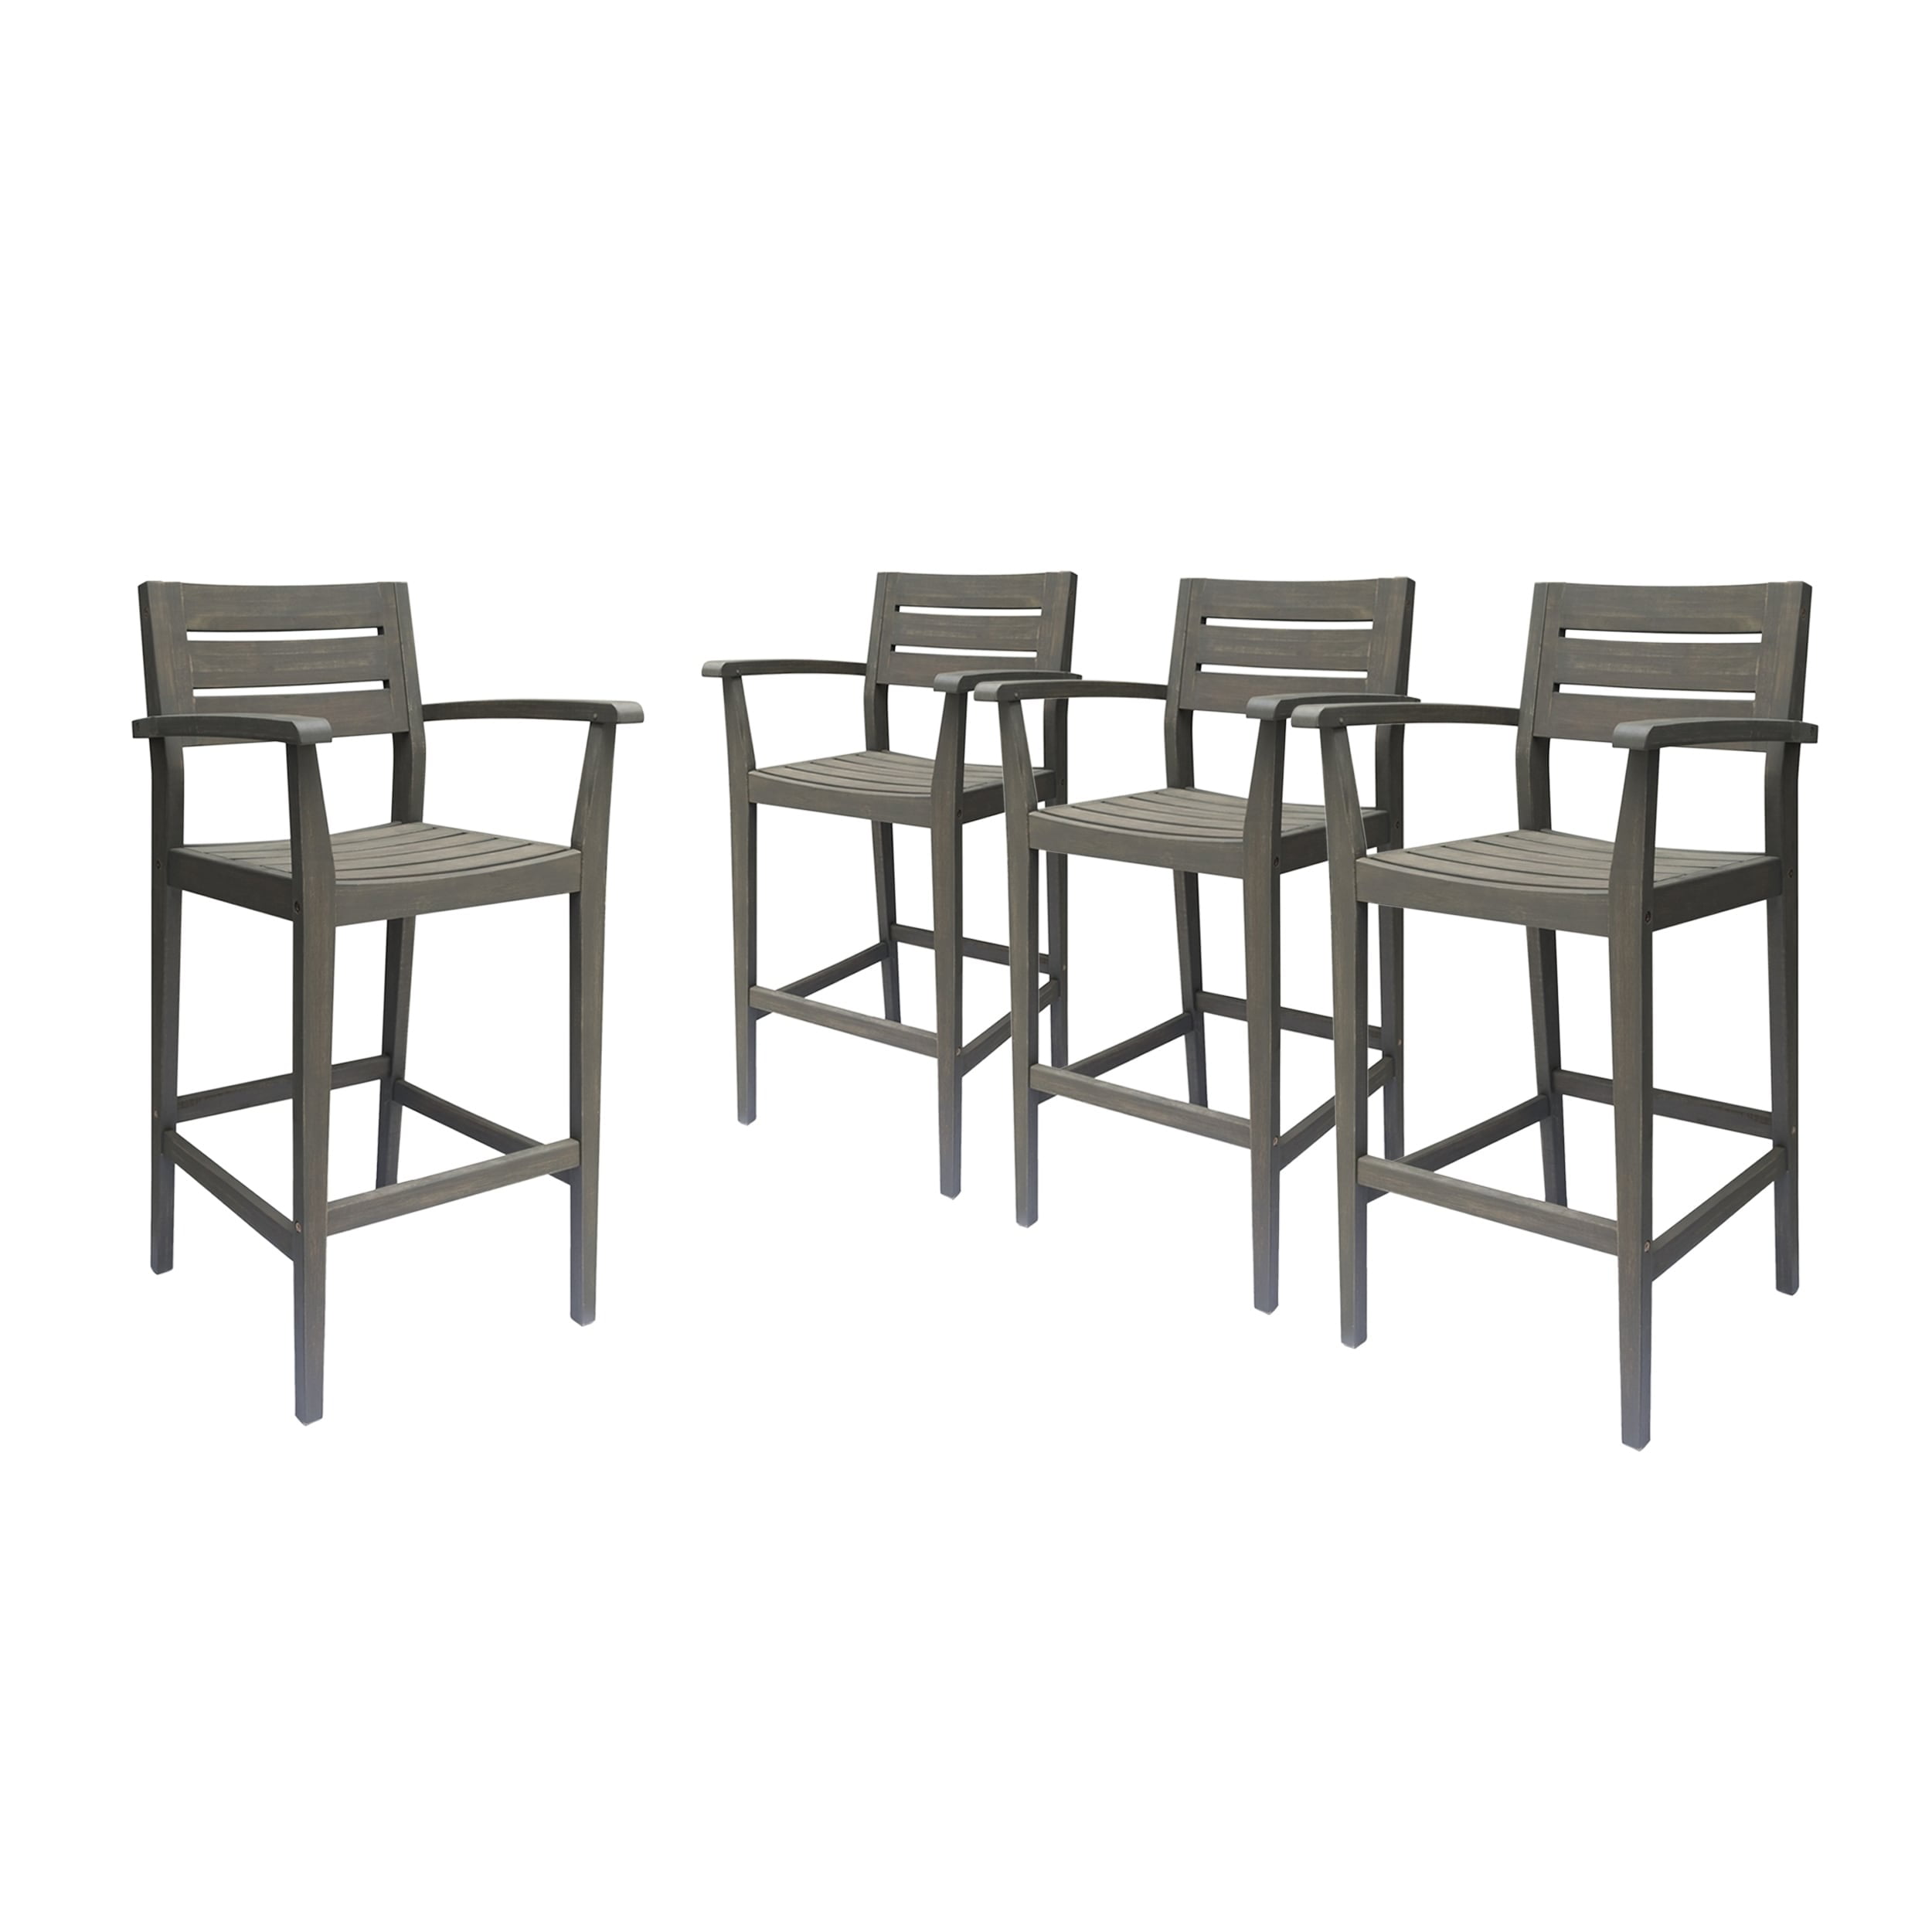 Christopher Knight Home Stamford, White Wicker Outdoor Bar Stool Set Of 4 By Christopher Knight Home